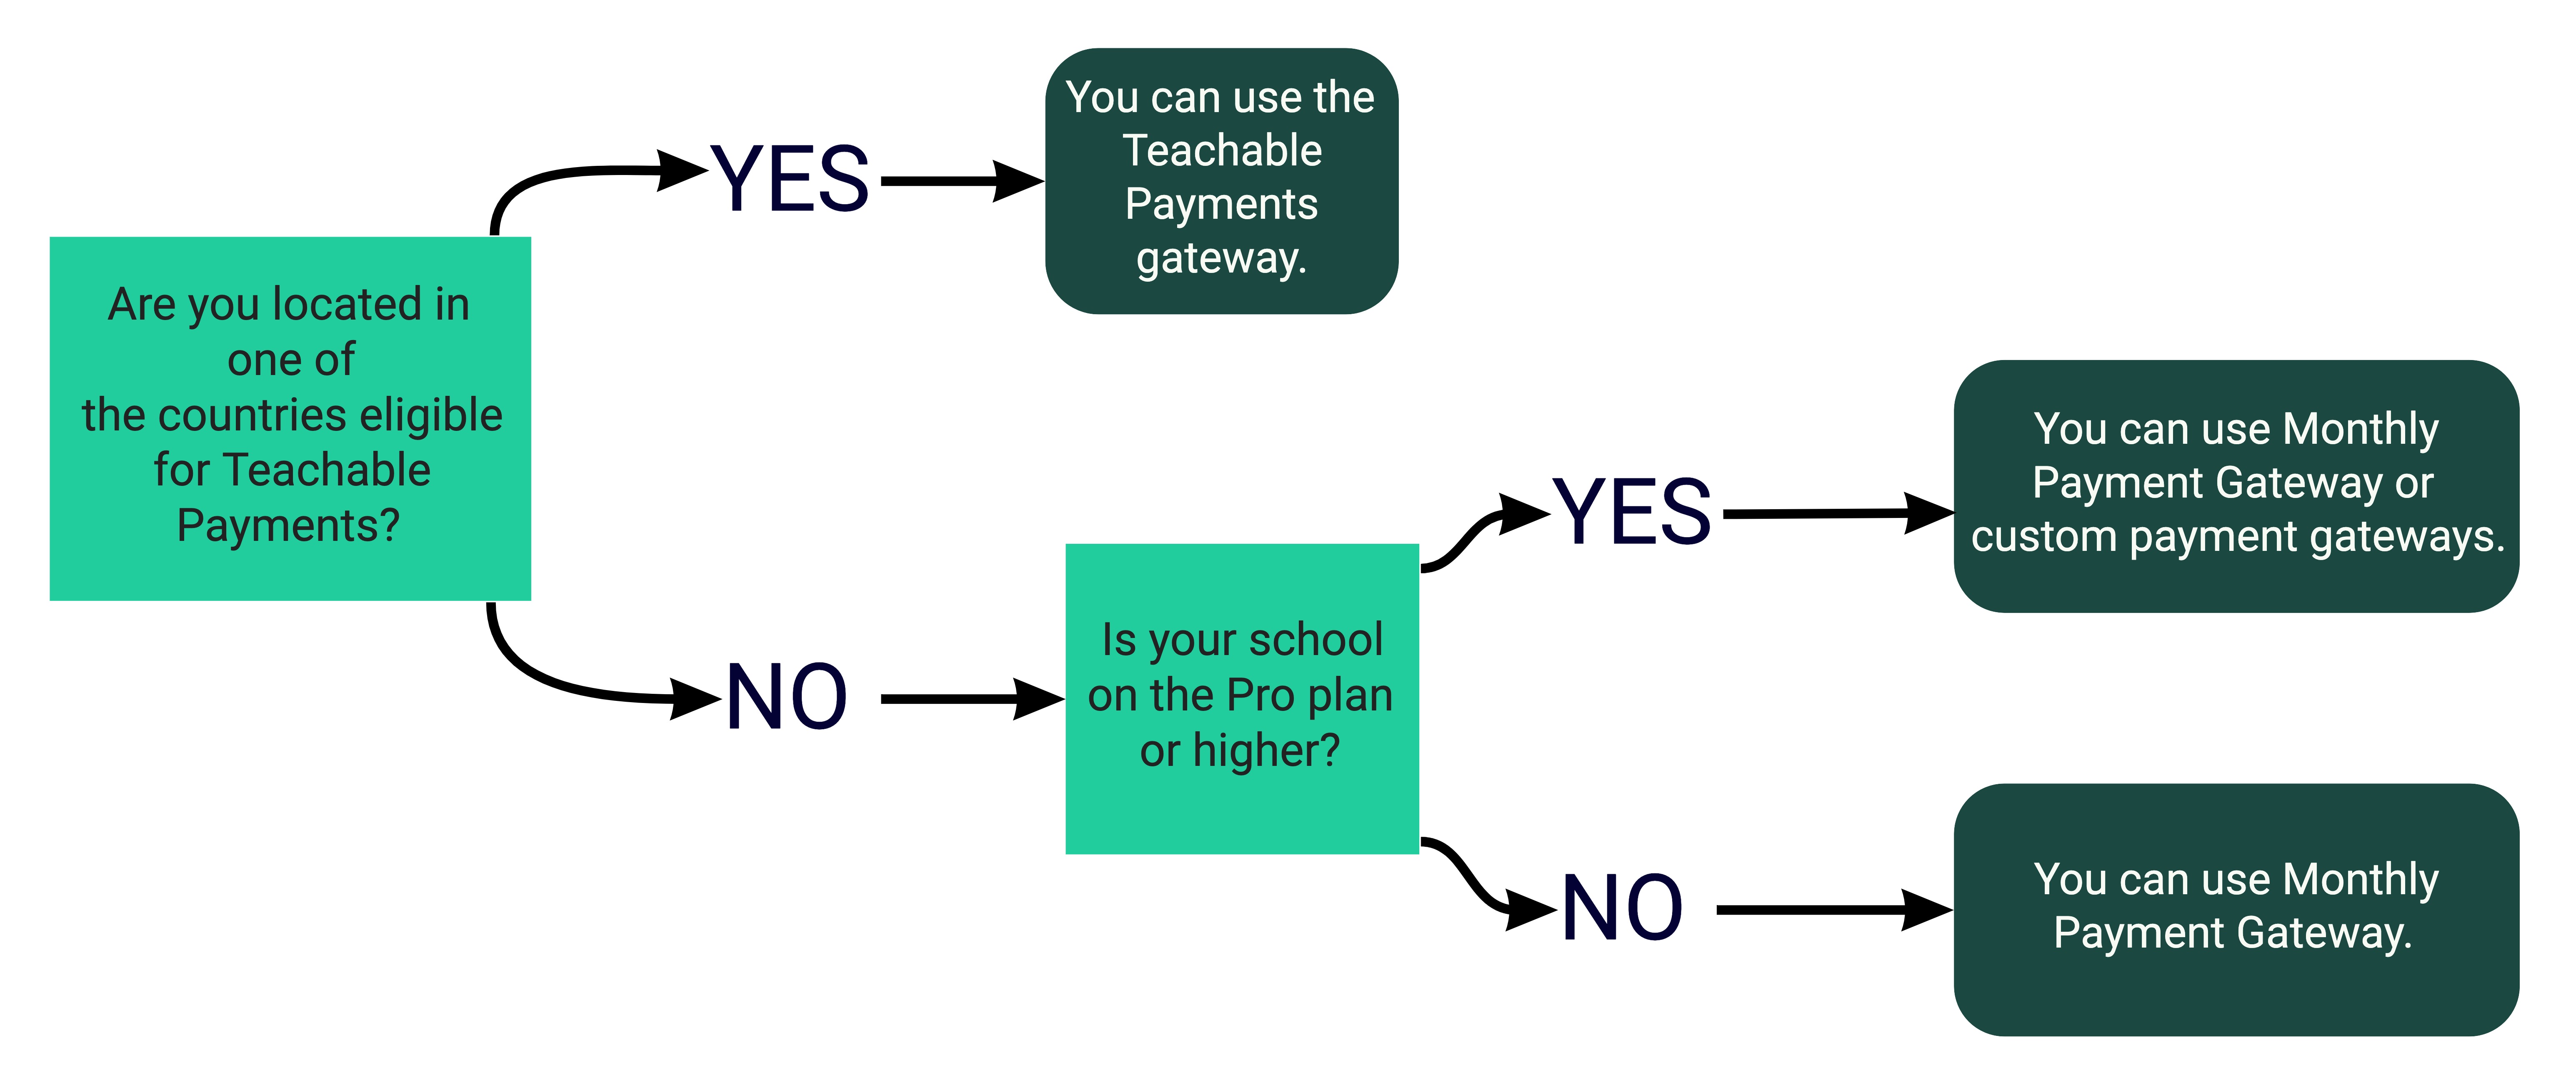 The image is a flowchart to help determine eligibility for custom payment gateways. You can set up a custom payment gateway if you are not eligible for Teachable Payments and you are on the Pro plan and up.